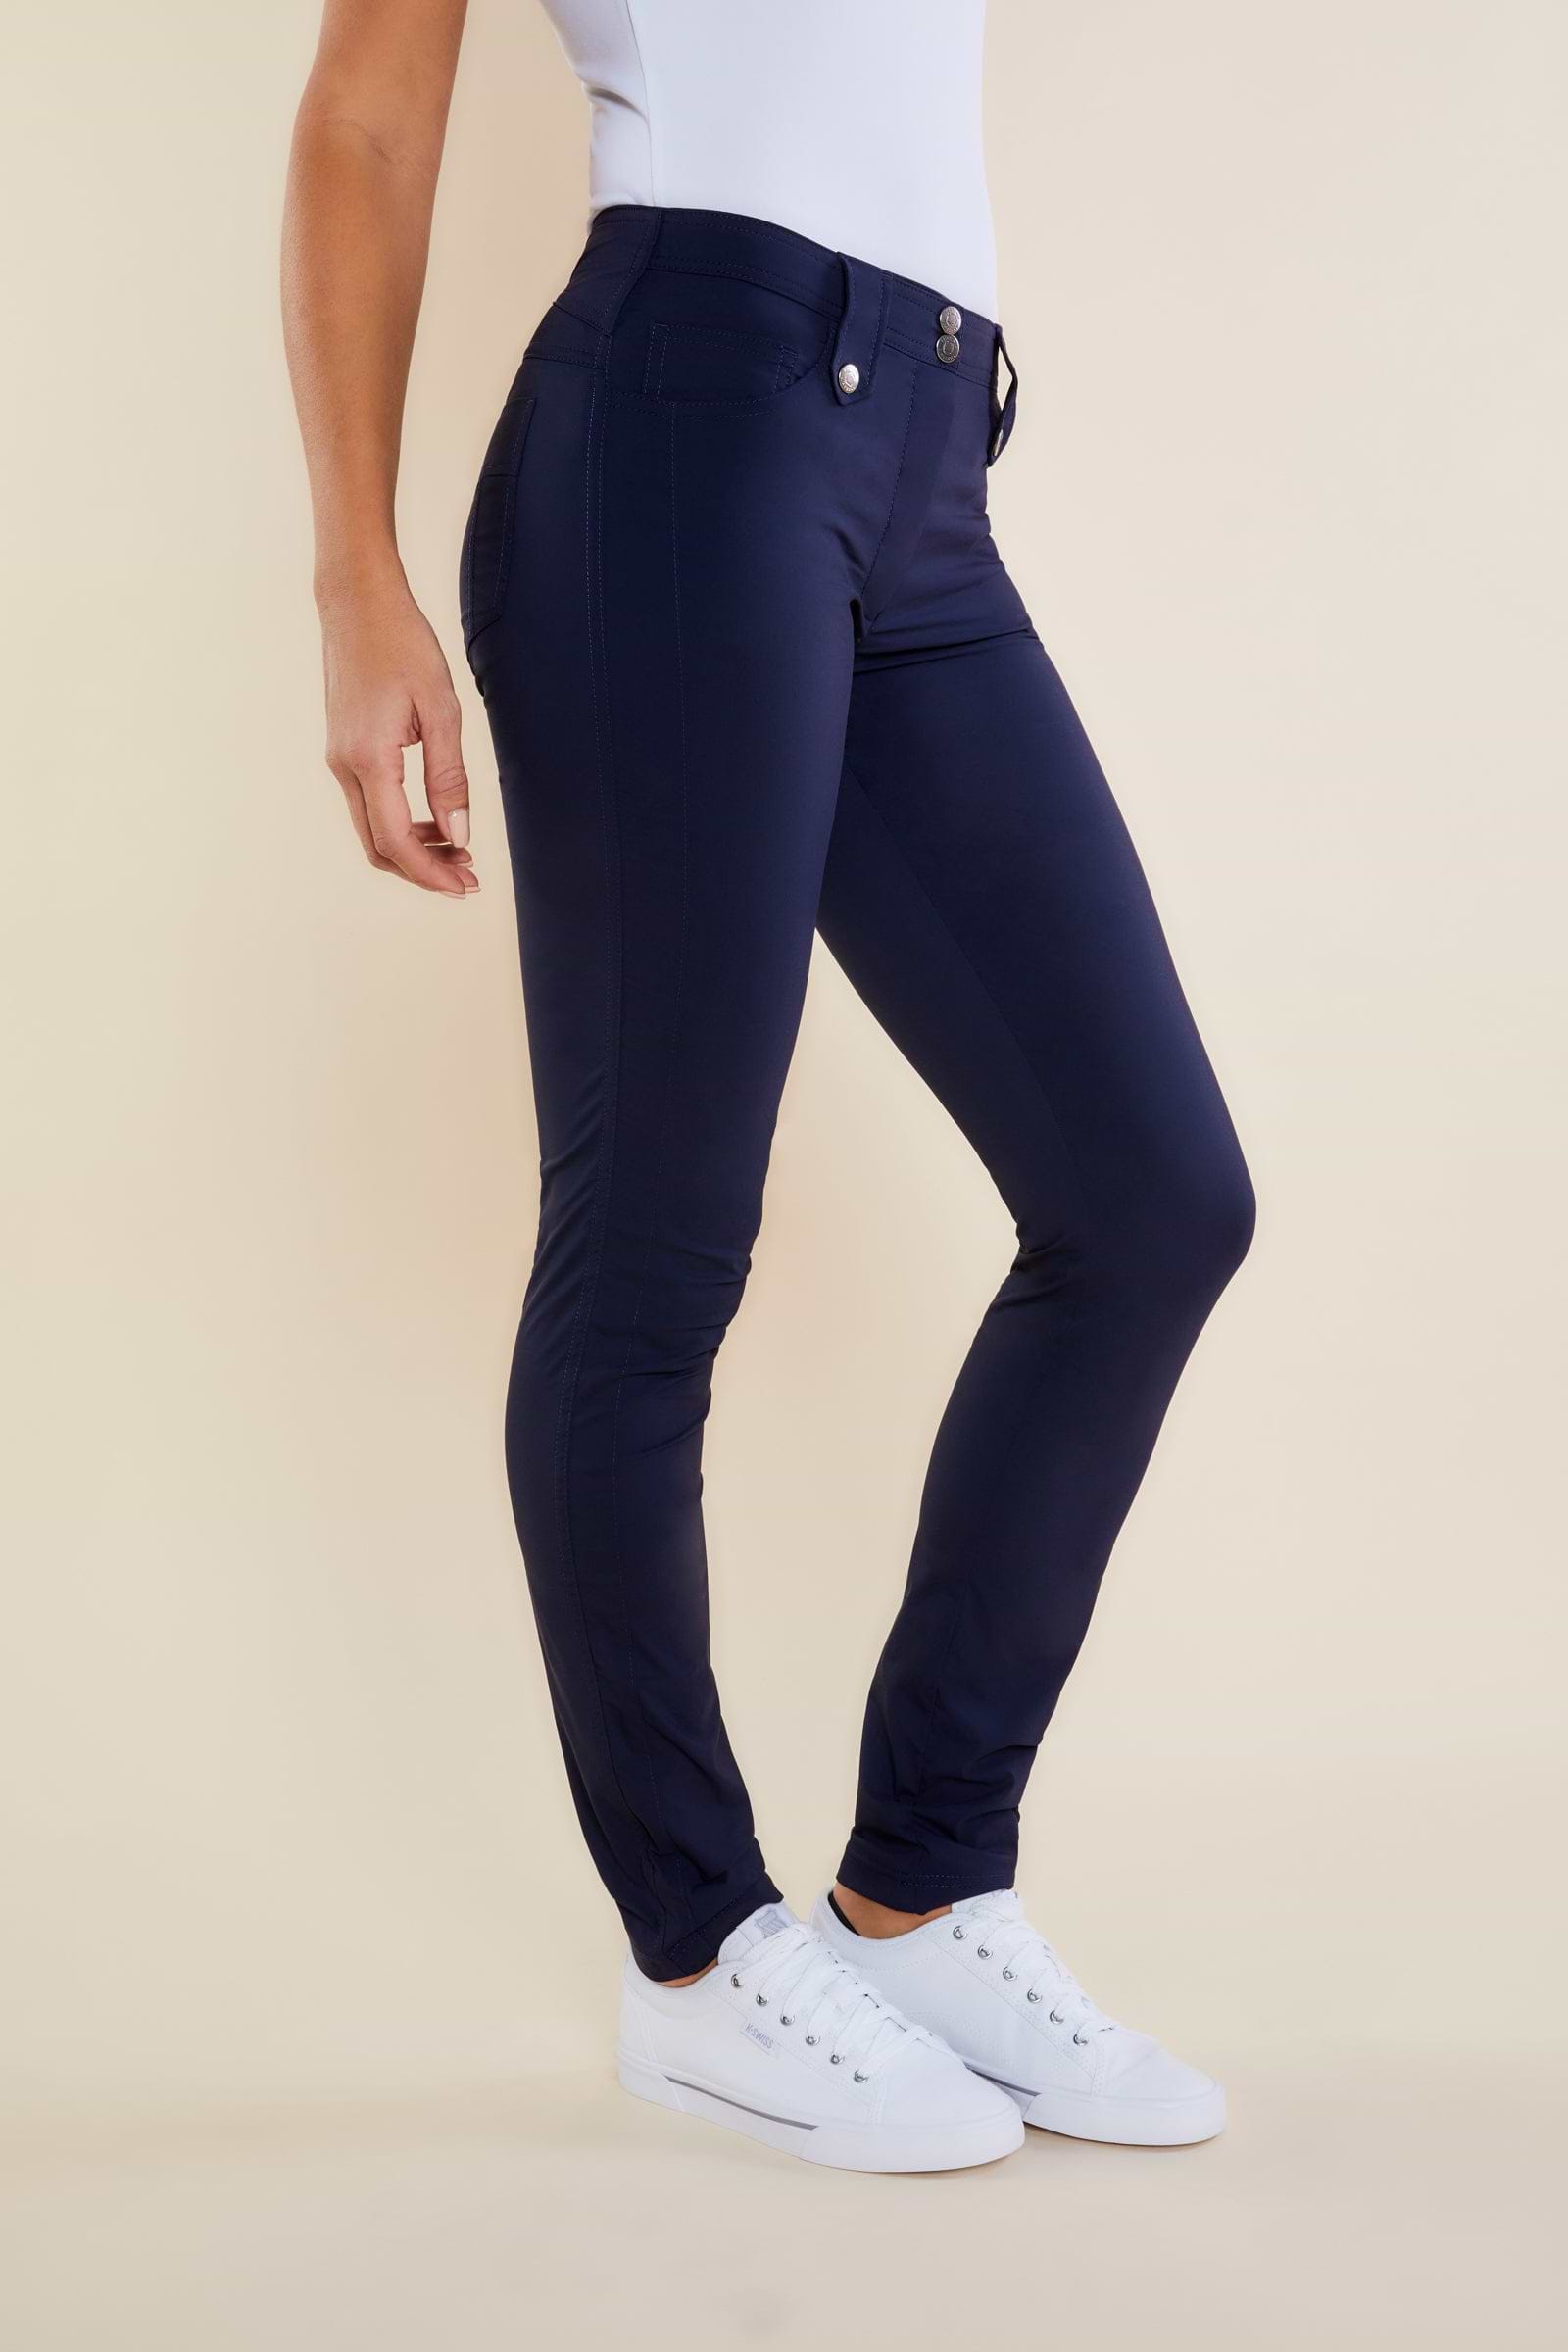 The Best Travel Pants. Side Profile of the Skyler Travel Pant in Navy